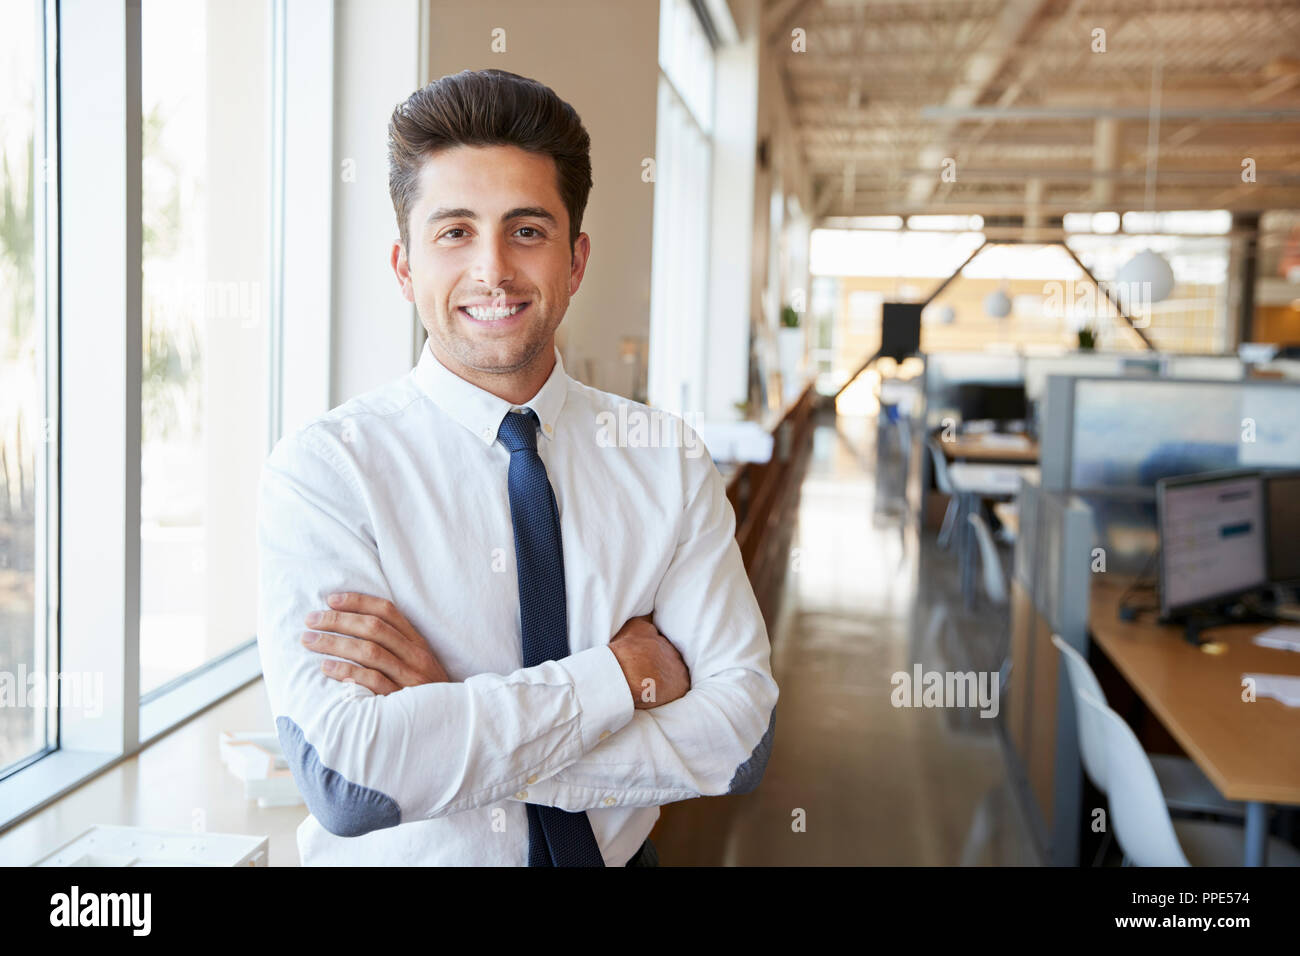 Young Hispanic male architect in office smiling to camera Banque D'Images